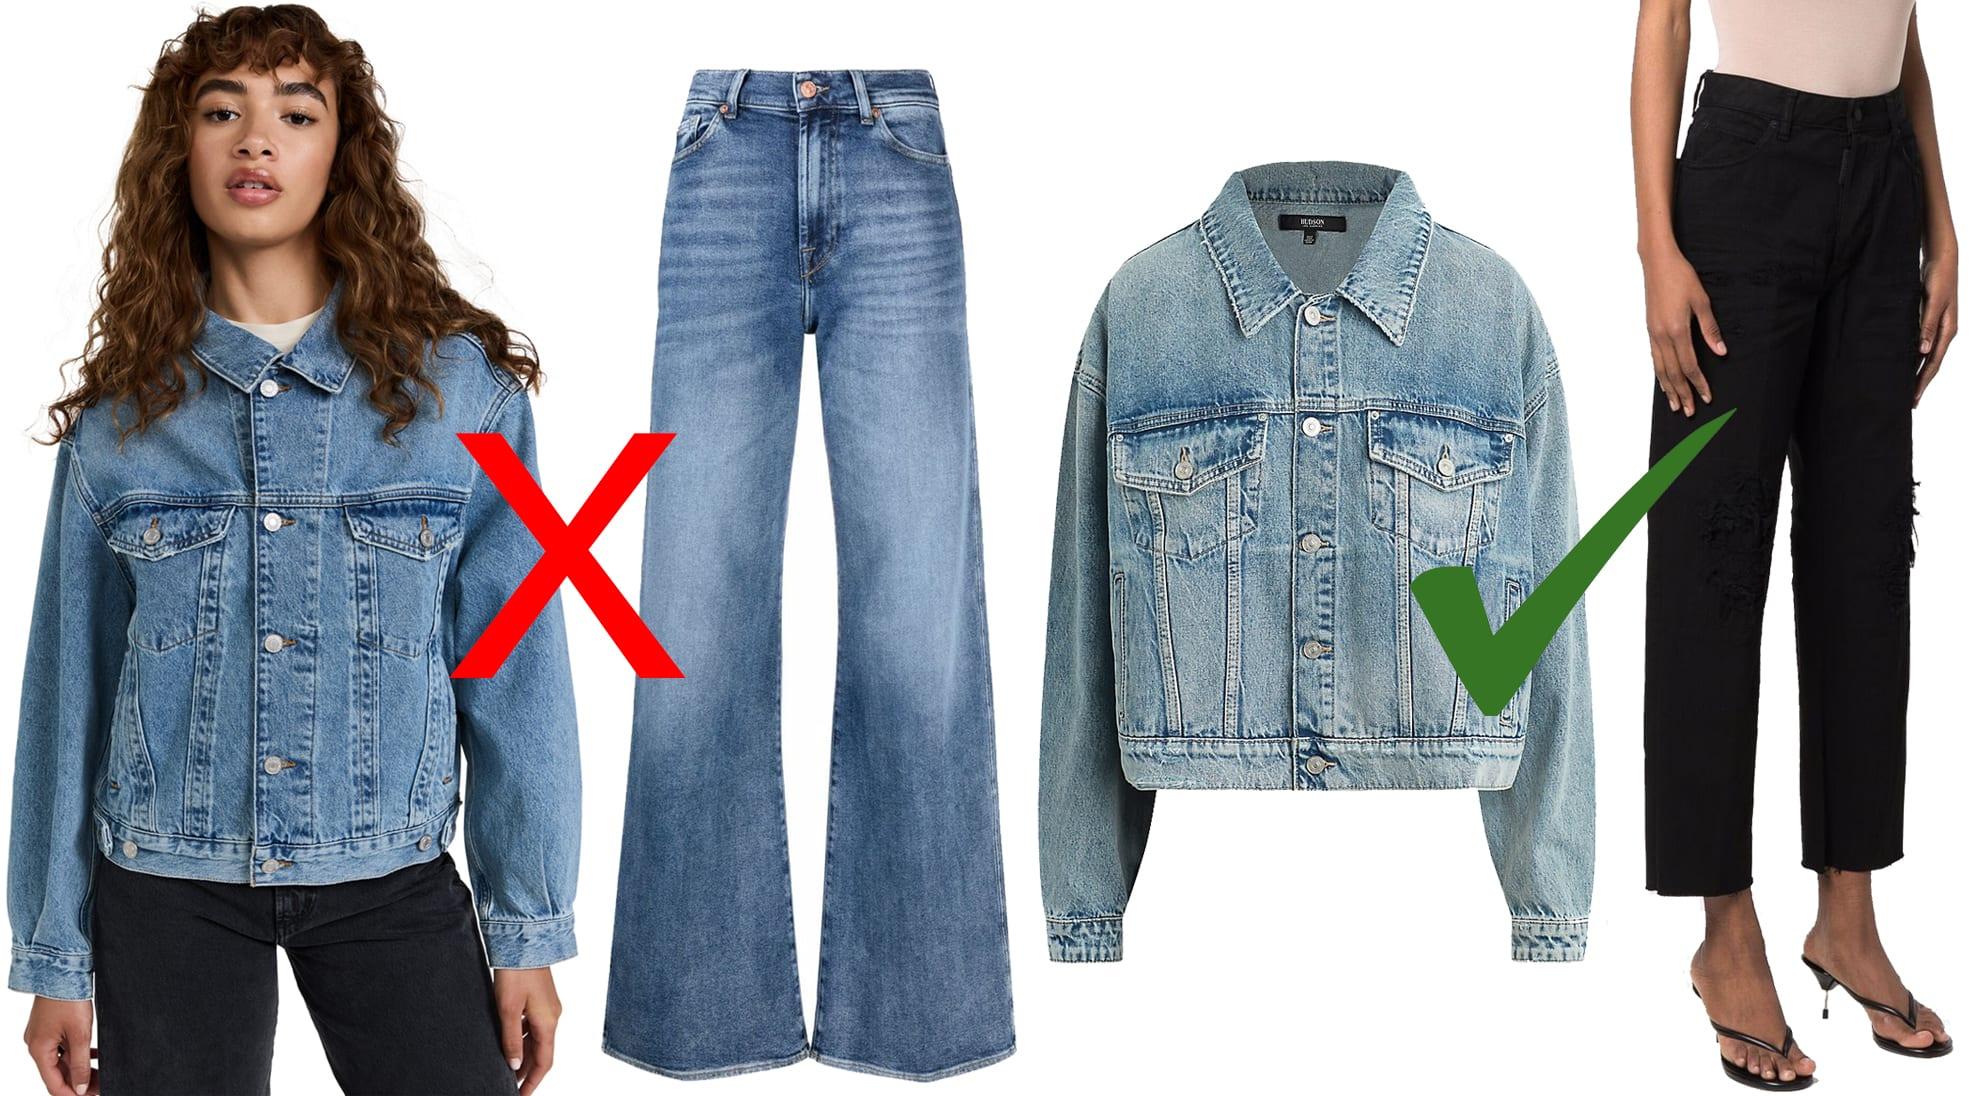 Contrast Mastery: The Hudson Jeans Brea Denim Swing Trucker Jacket paired with Dsquared2's Cropped Denim Jeans, an exemplar of mixing shades in denim-on-denim fashion for a striking visual appeal